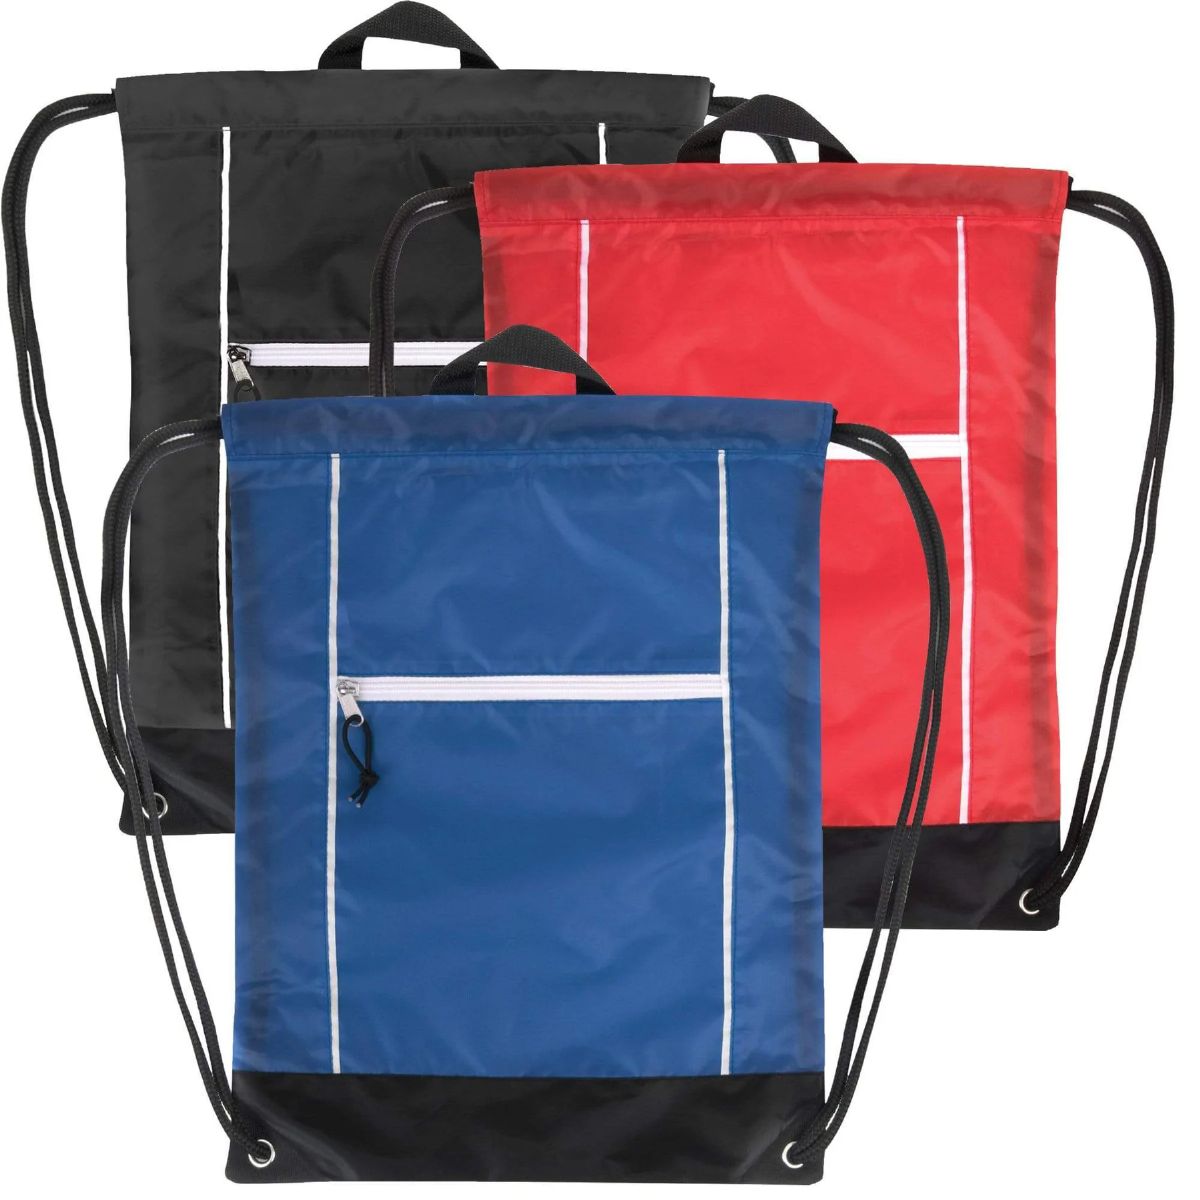 100 Wholesale 18 Inch Front Zippered Drawstring Bag - 3 Color Assortment